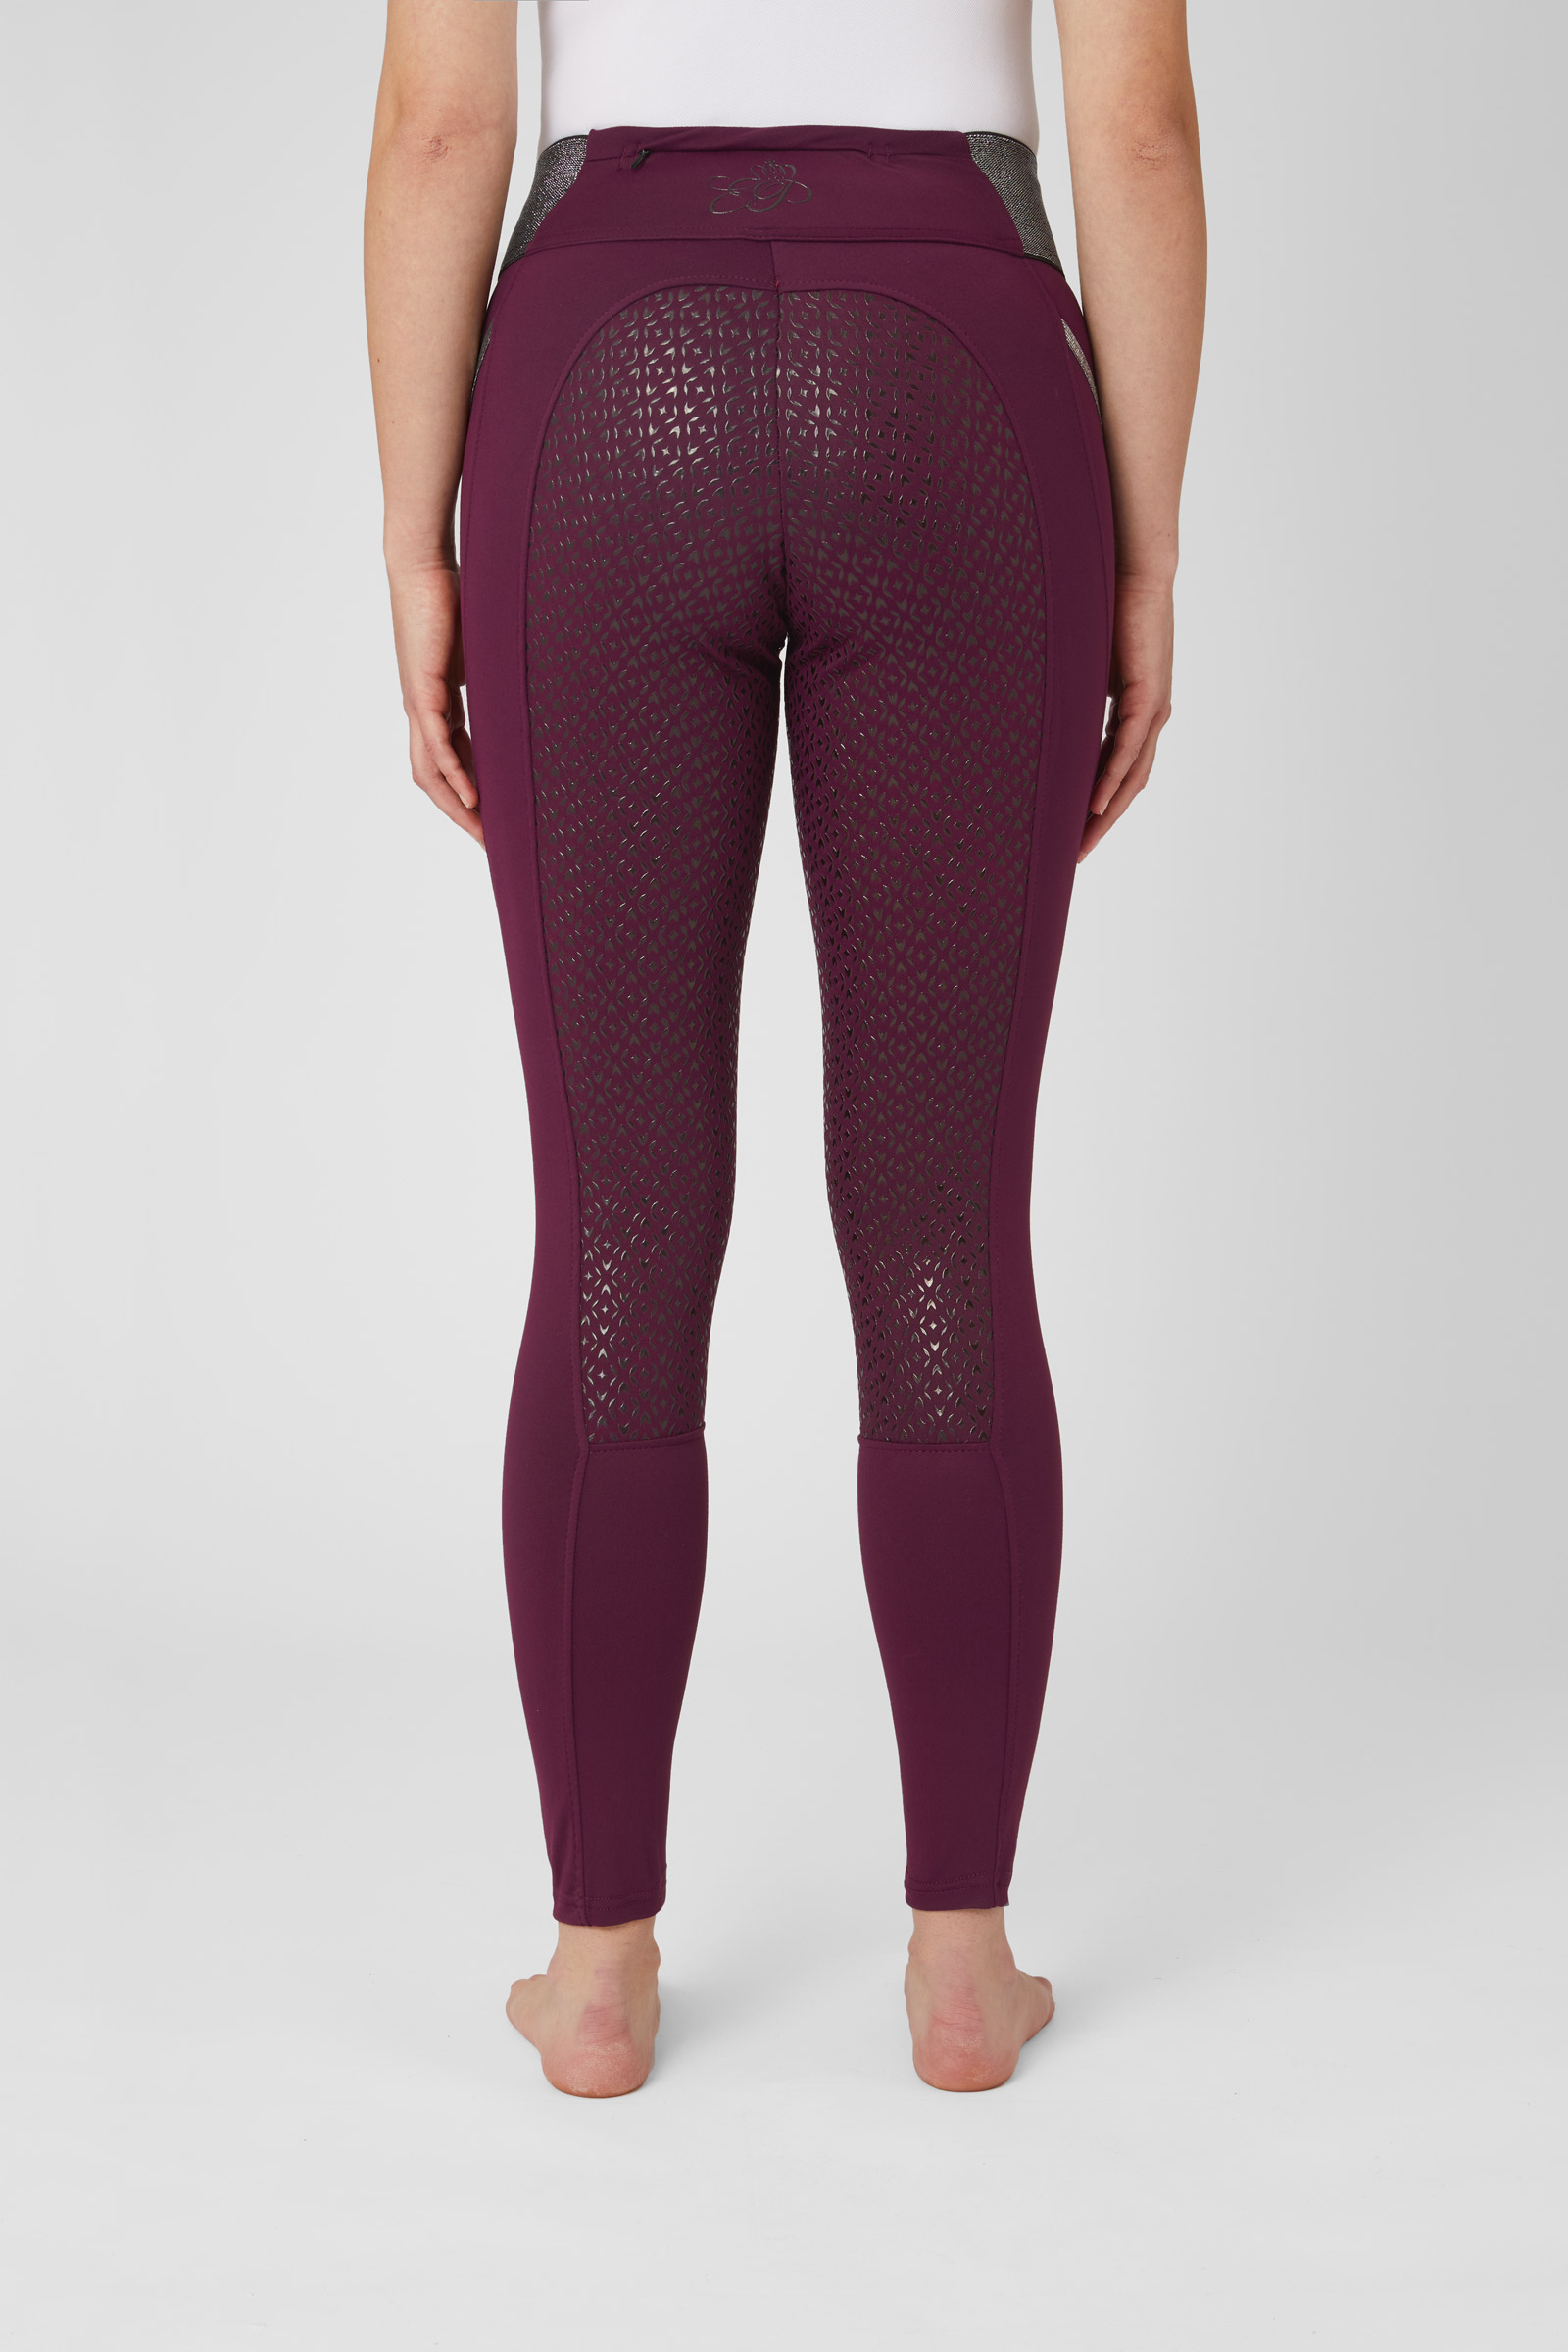 Buy Full Seat Riding Tights for Women with Glitter Waist